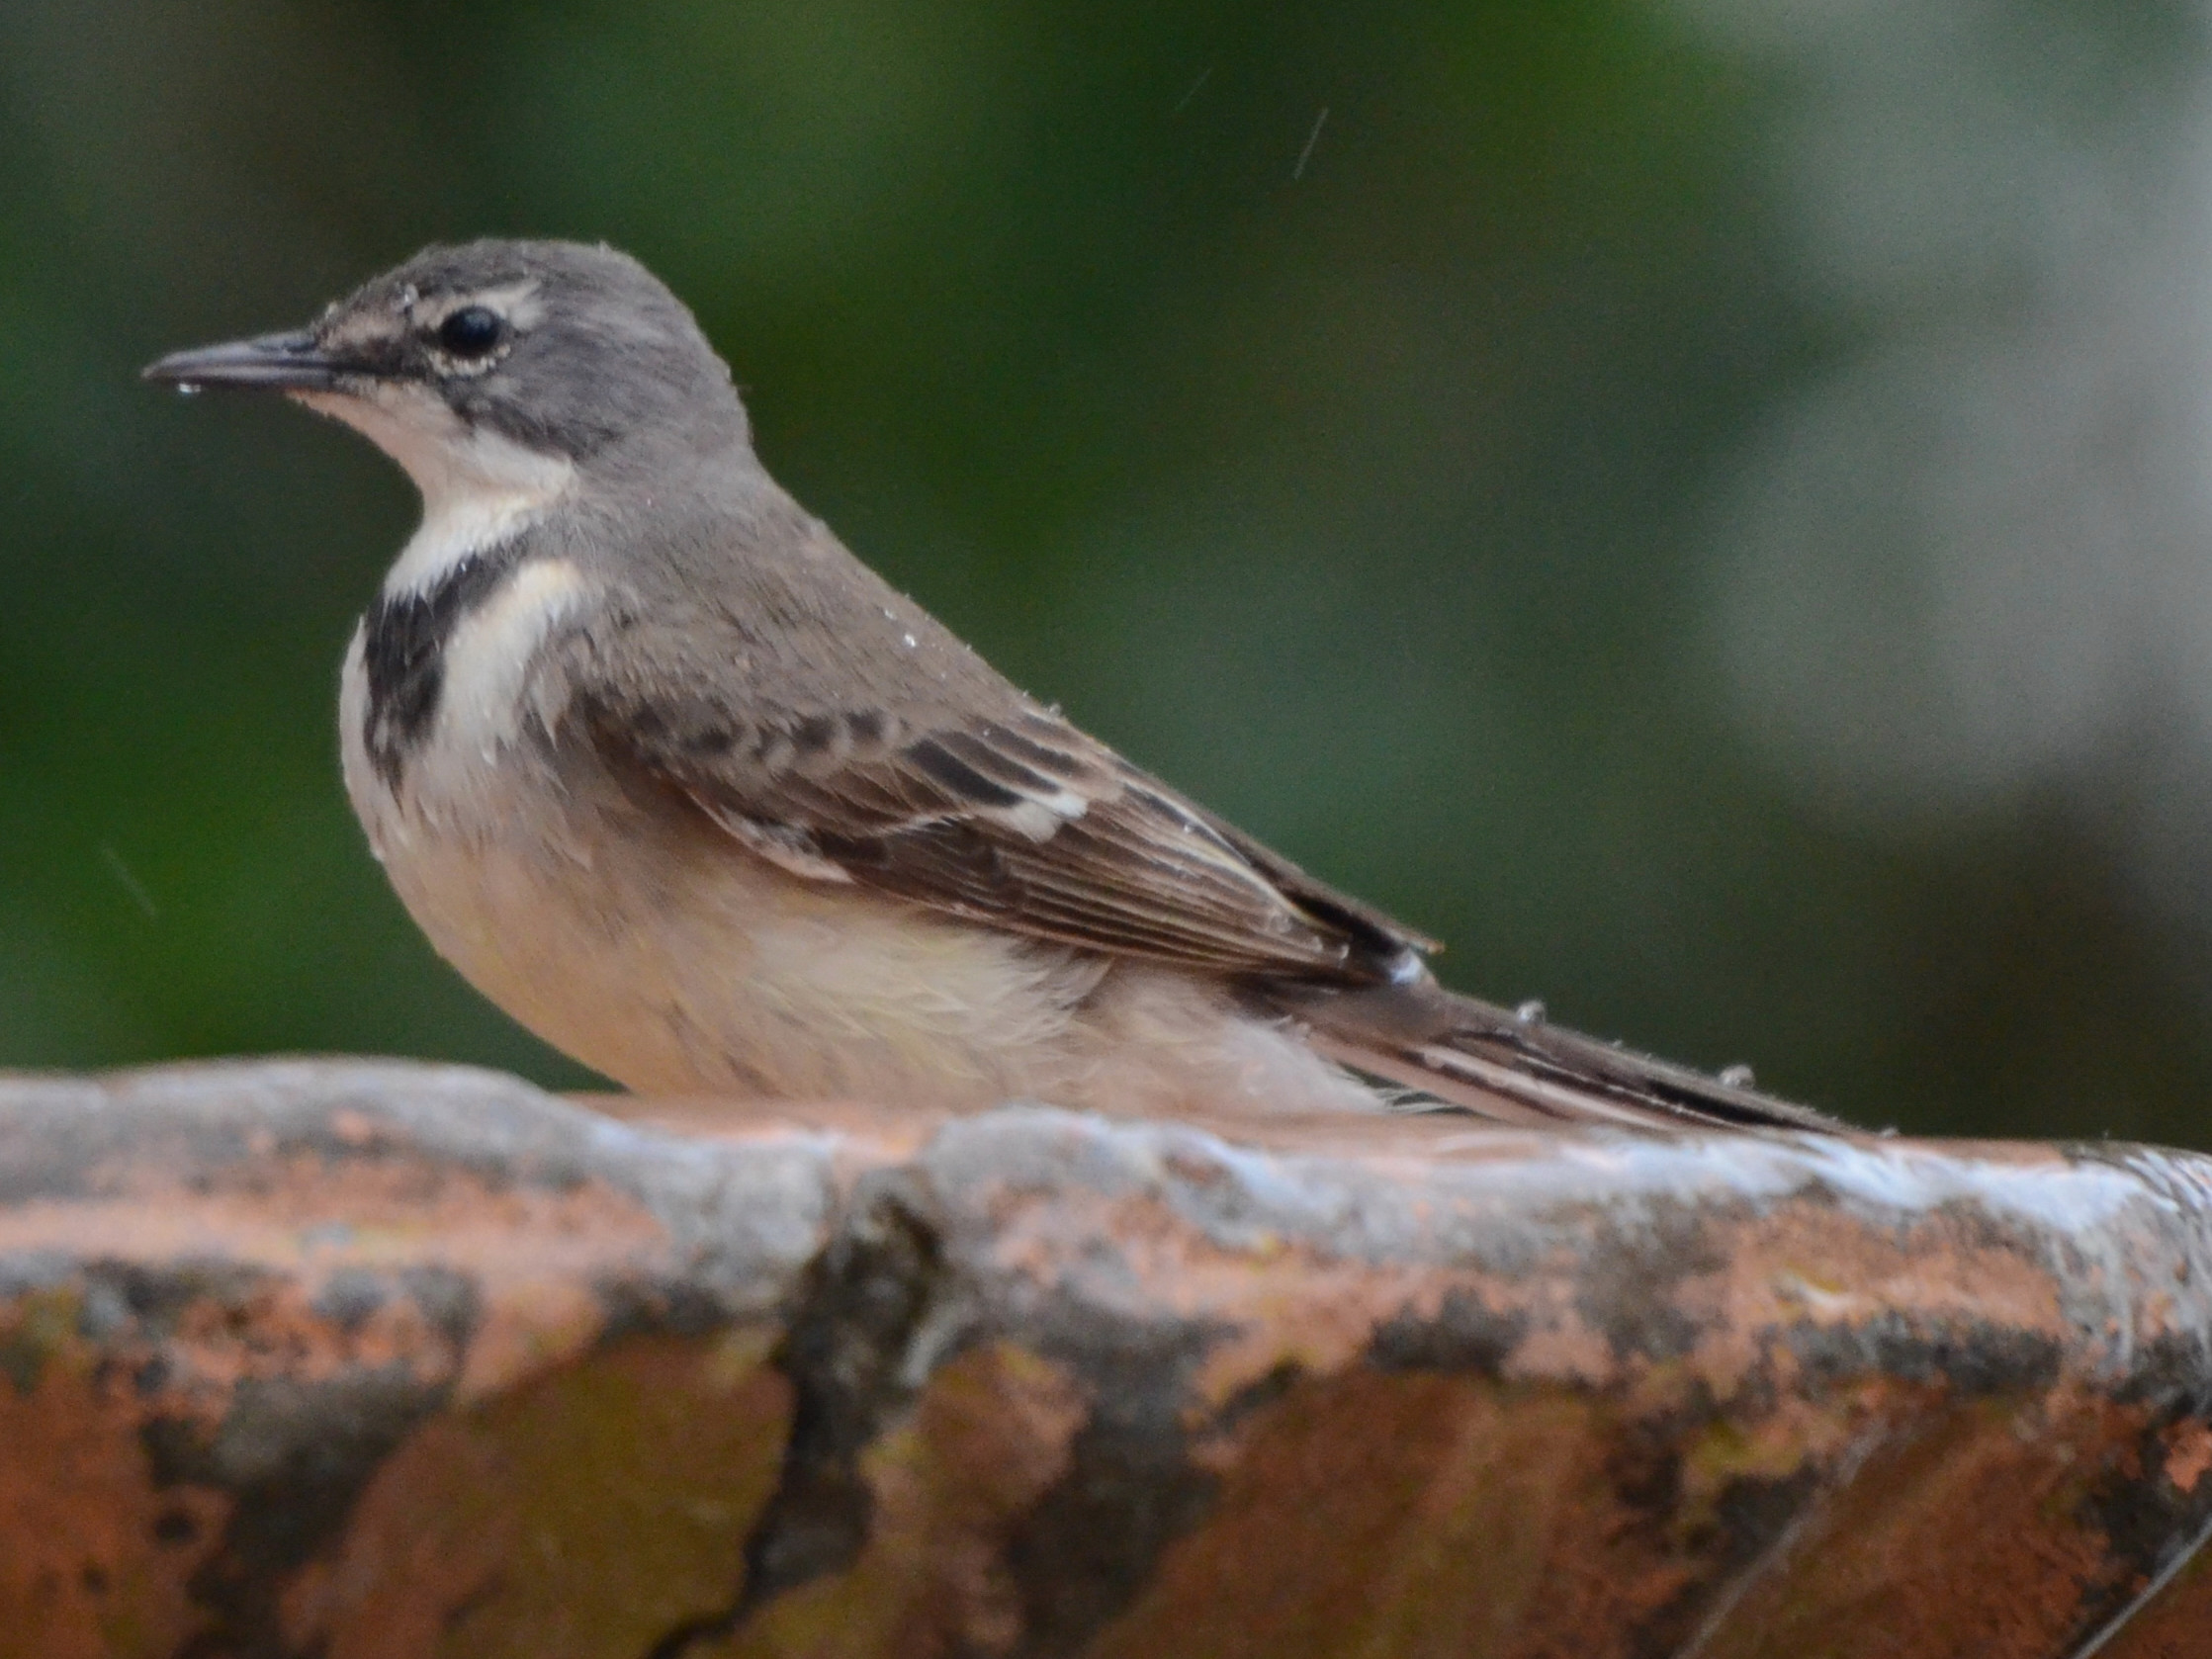 Click picture to see more Cape Wagtails.